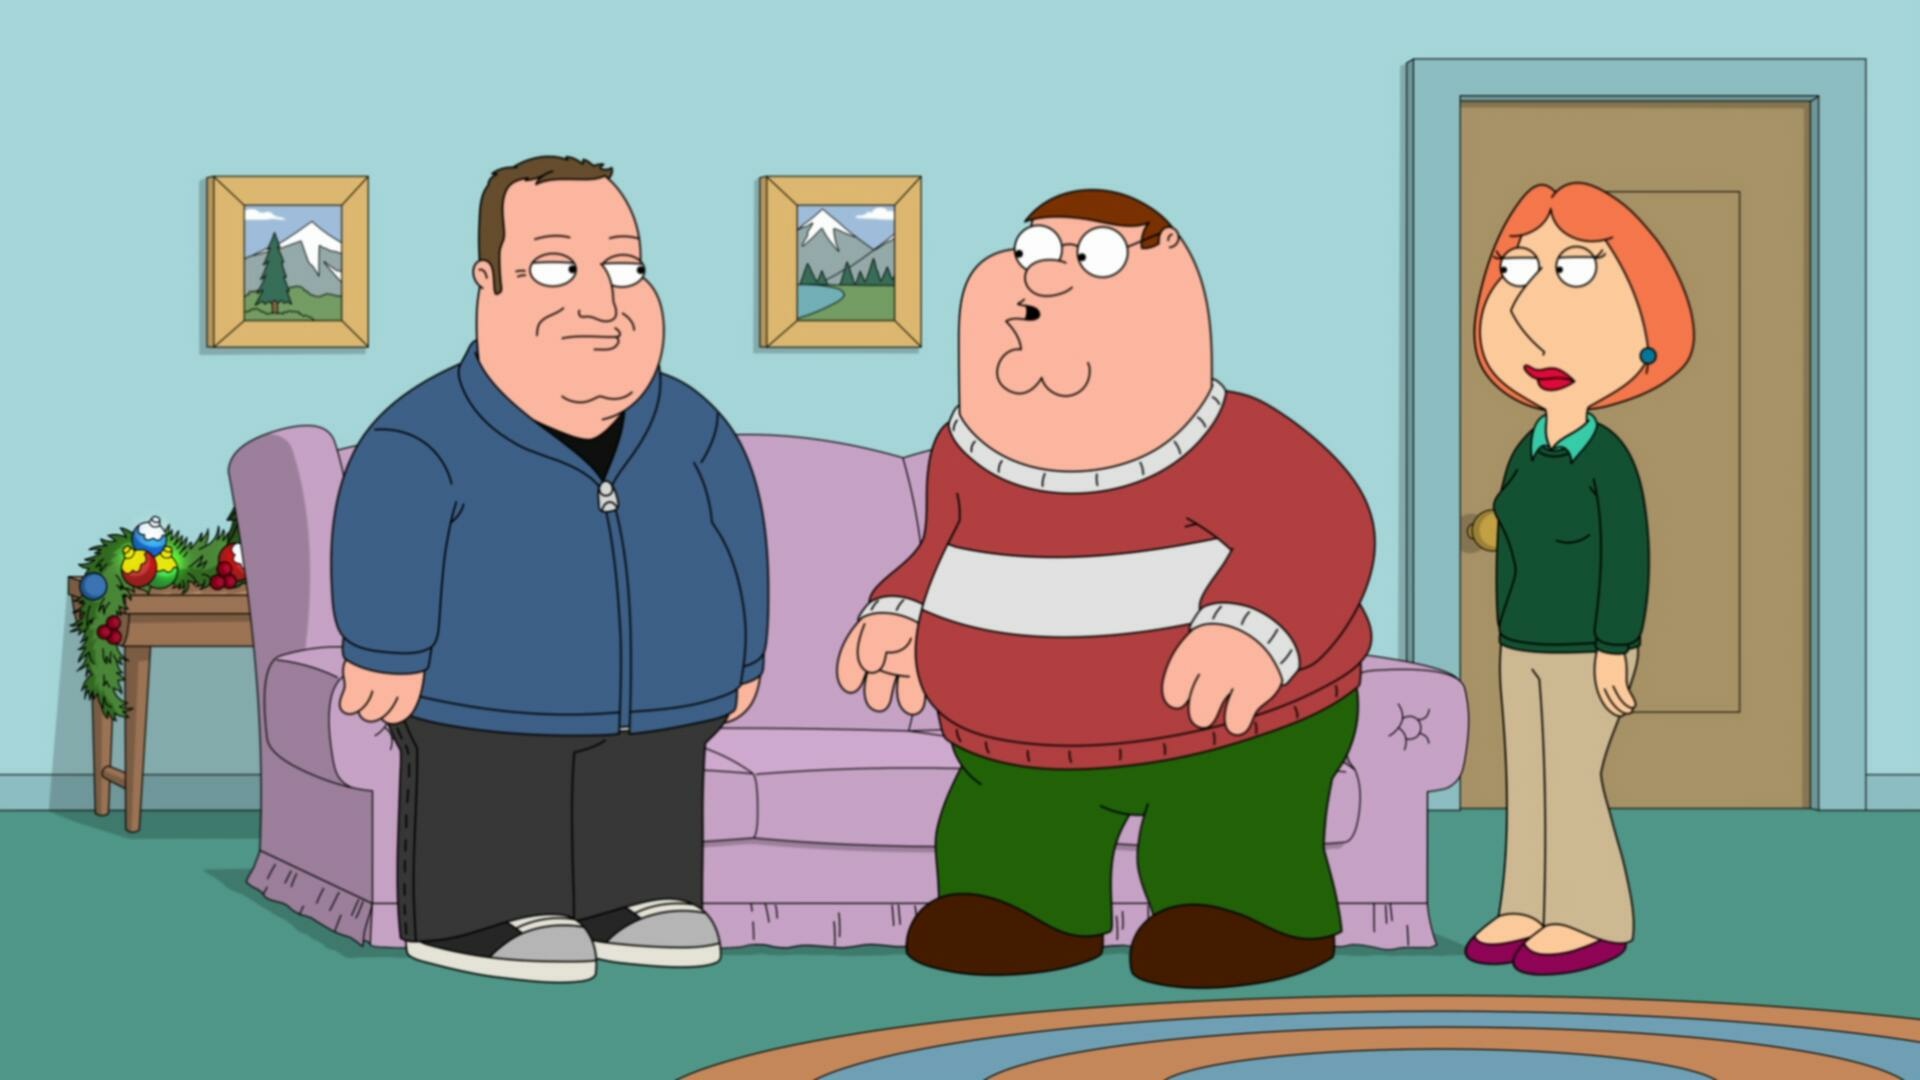 Family Guy S22E09 The Return of The King Of Queens 1080p DSNP WEB DL DDP5 1 H 264 NTb TGx